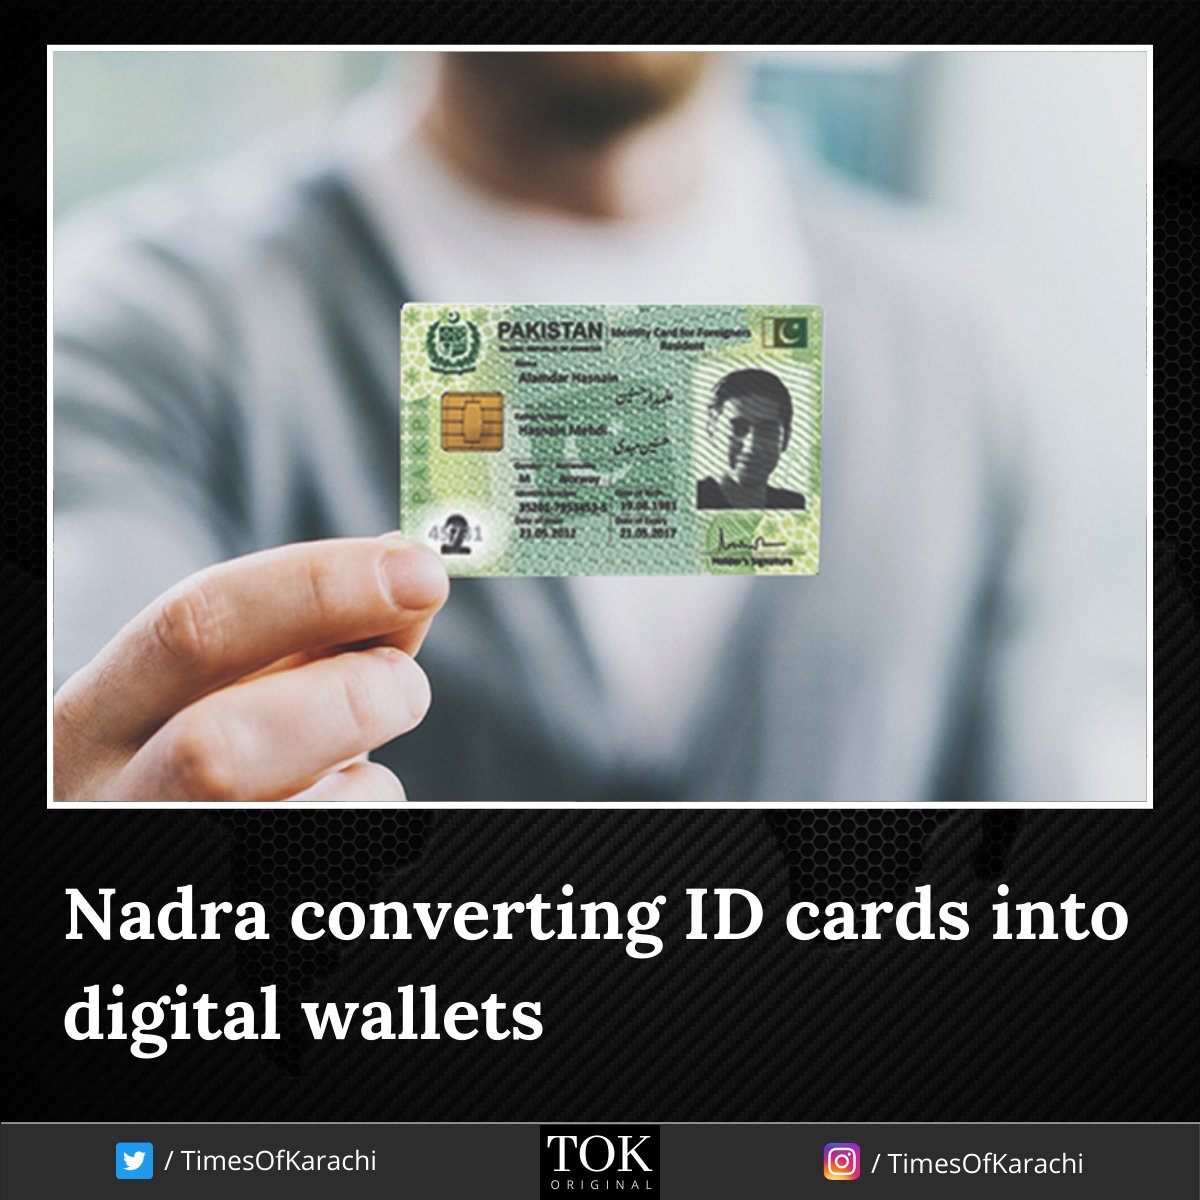 .@NadraPak is working to make the CNIC digital wallets under the @GovtofPakistan's Digital Pakistan vision and an update to an already existing app will likely be made available later this year. #NADRA #DigitalWallet #DigitalPaymentGateway #TimesOfKarachi